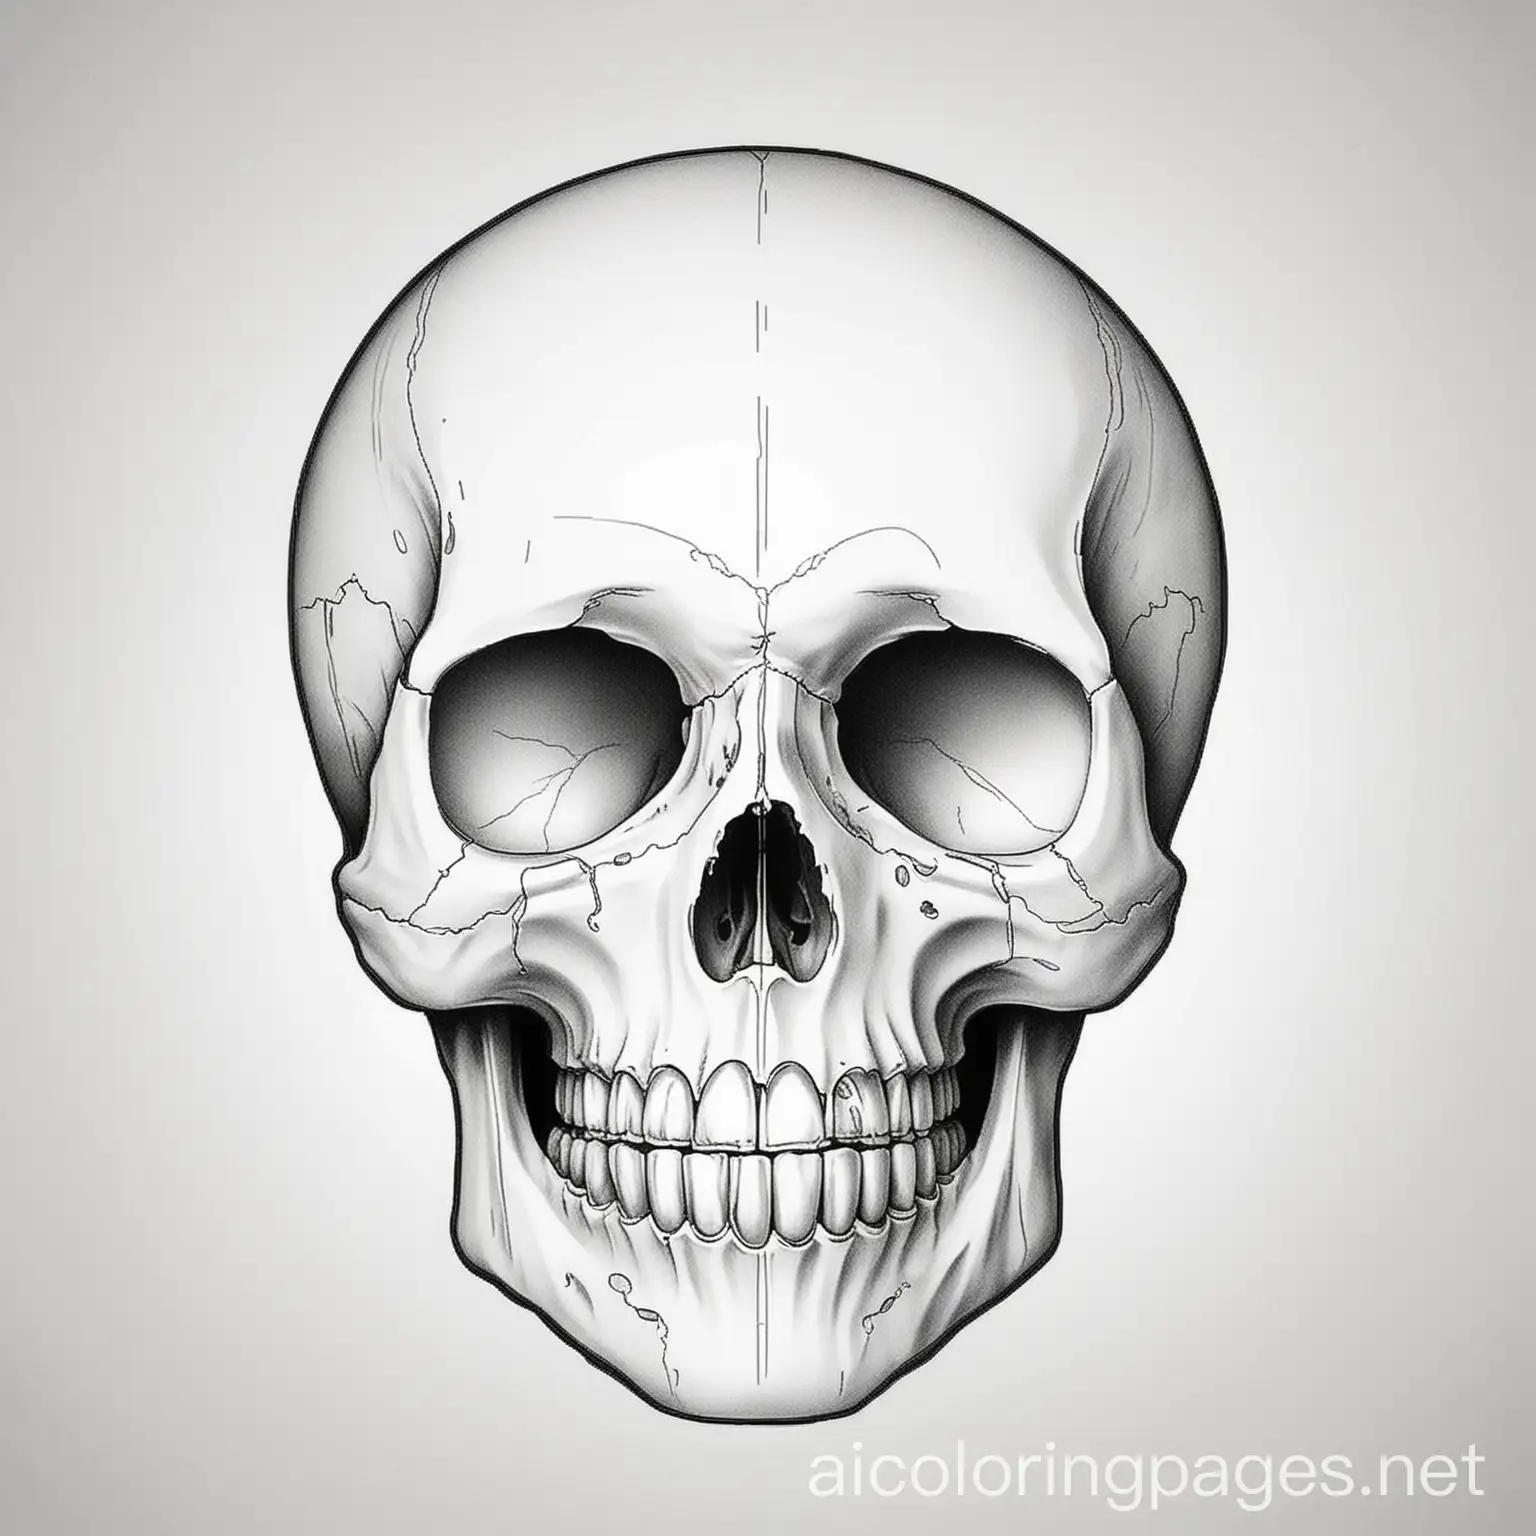 Skull-Coloring-Page-with-Simplicity-and-Ample-White-Space